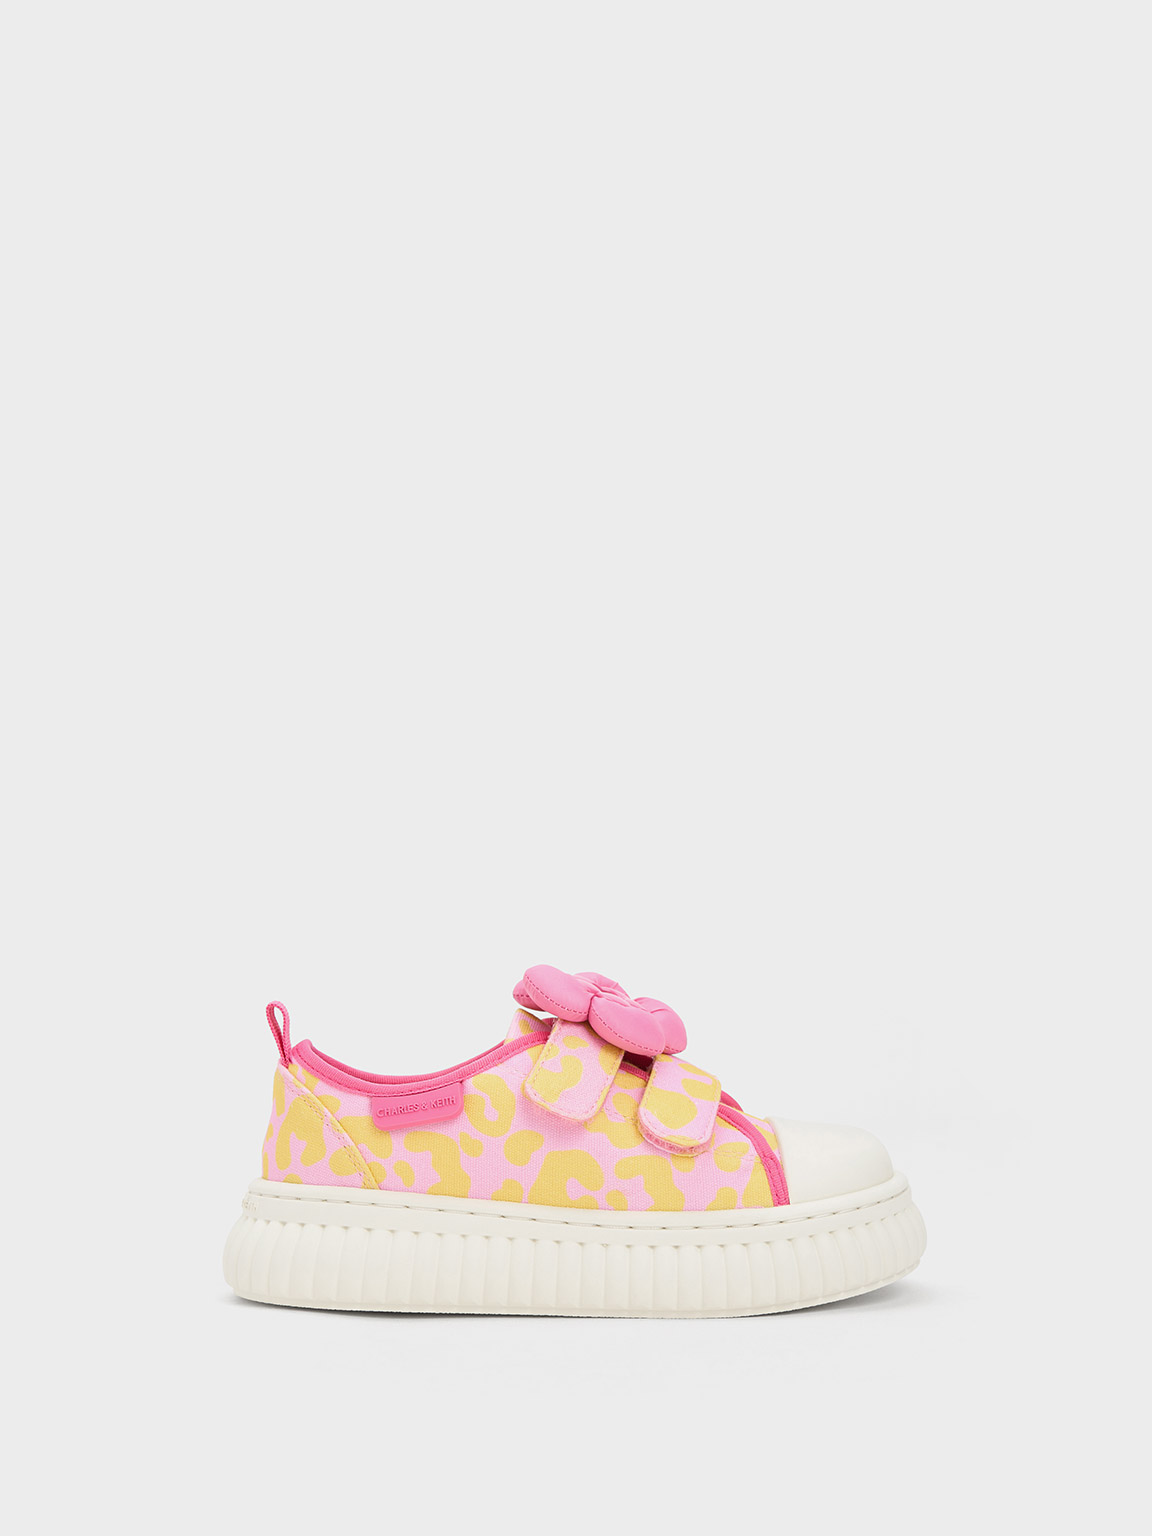 Charles & Keith - Girls' Puffy Flower Printed Sneakers In Light Pink